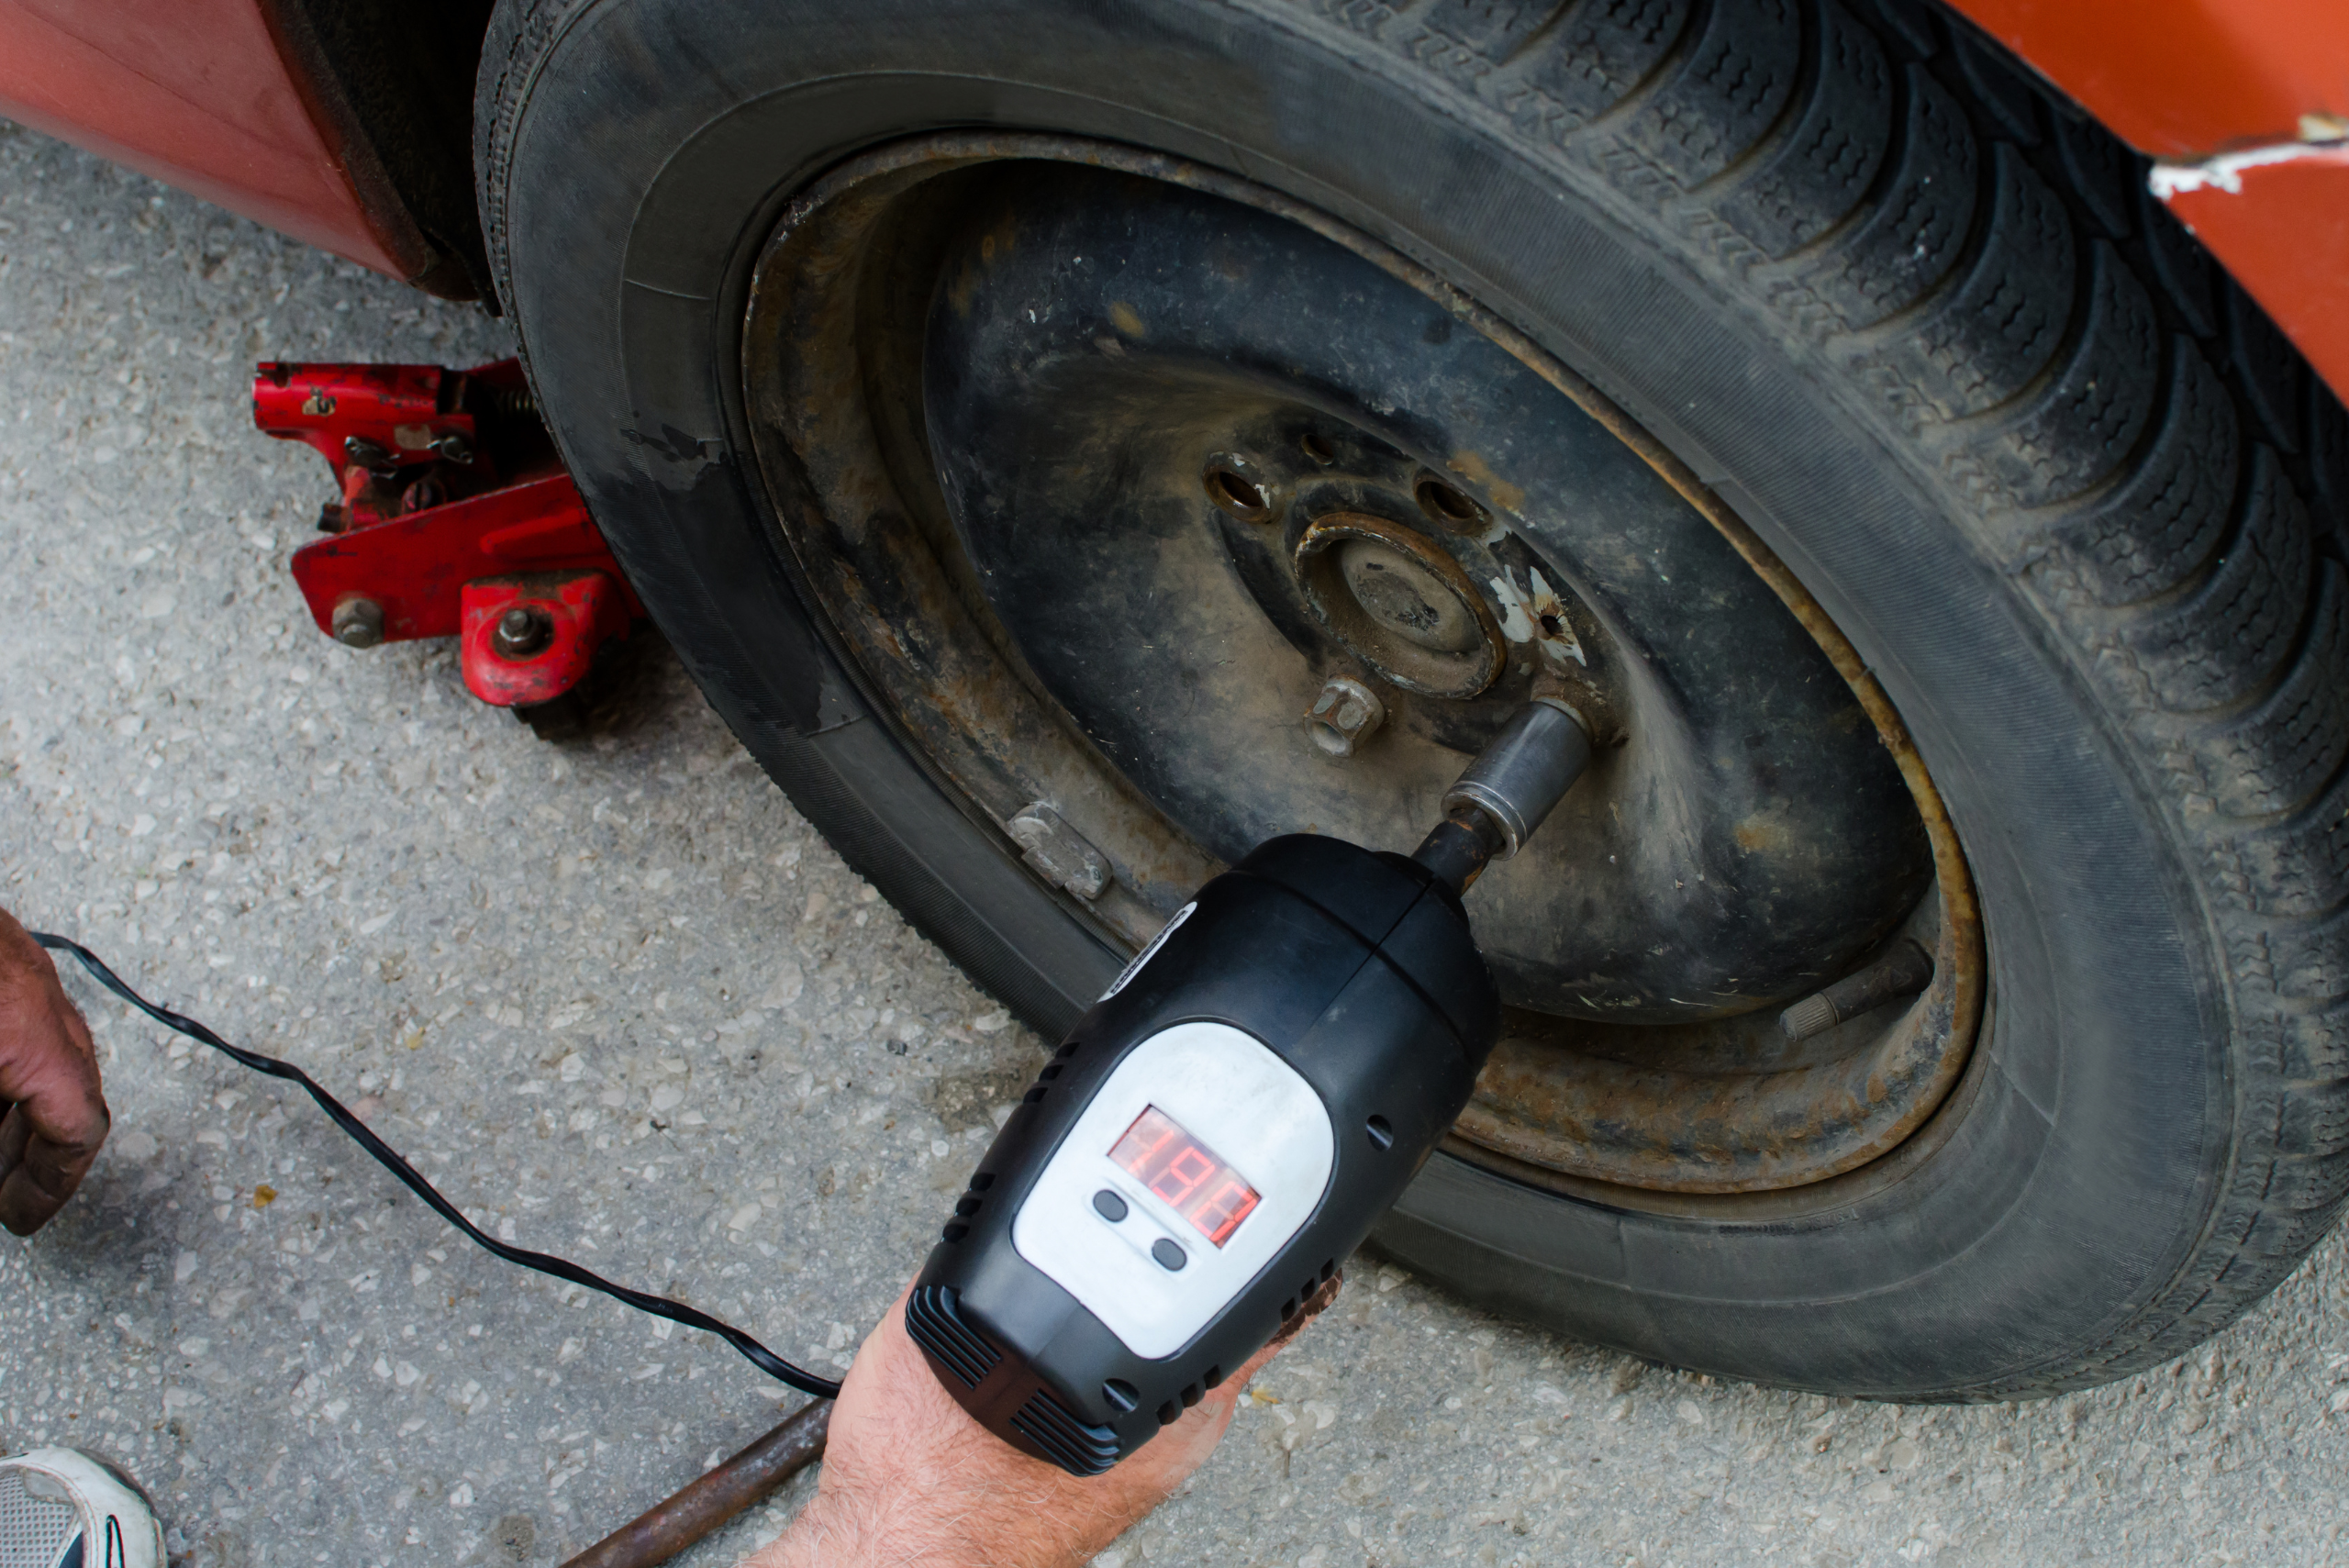 Removing lug nuts using impact wrench.